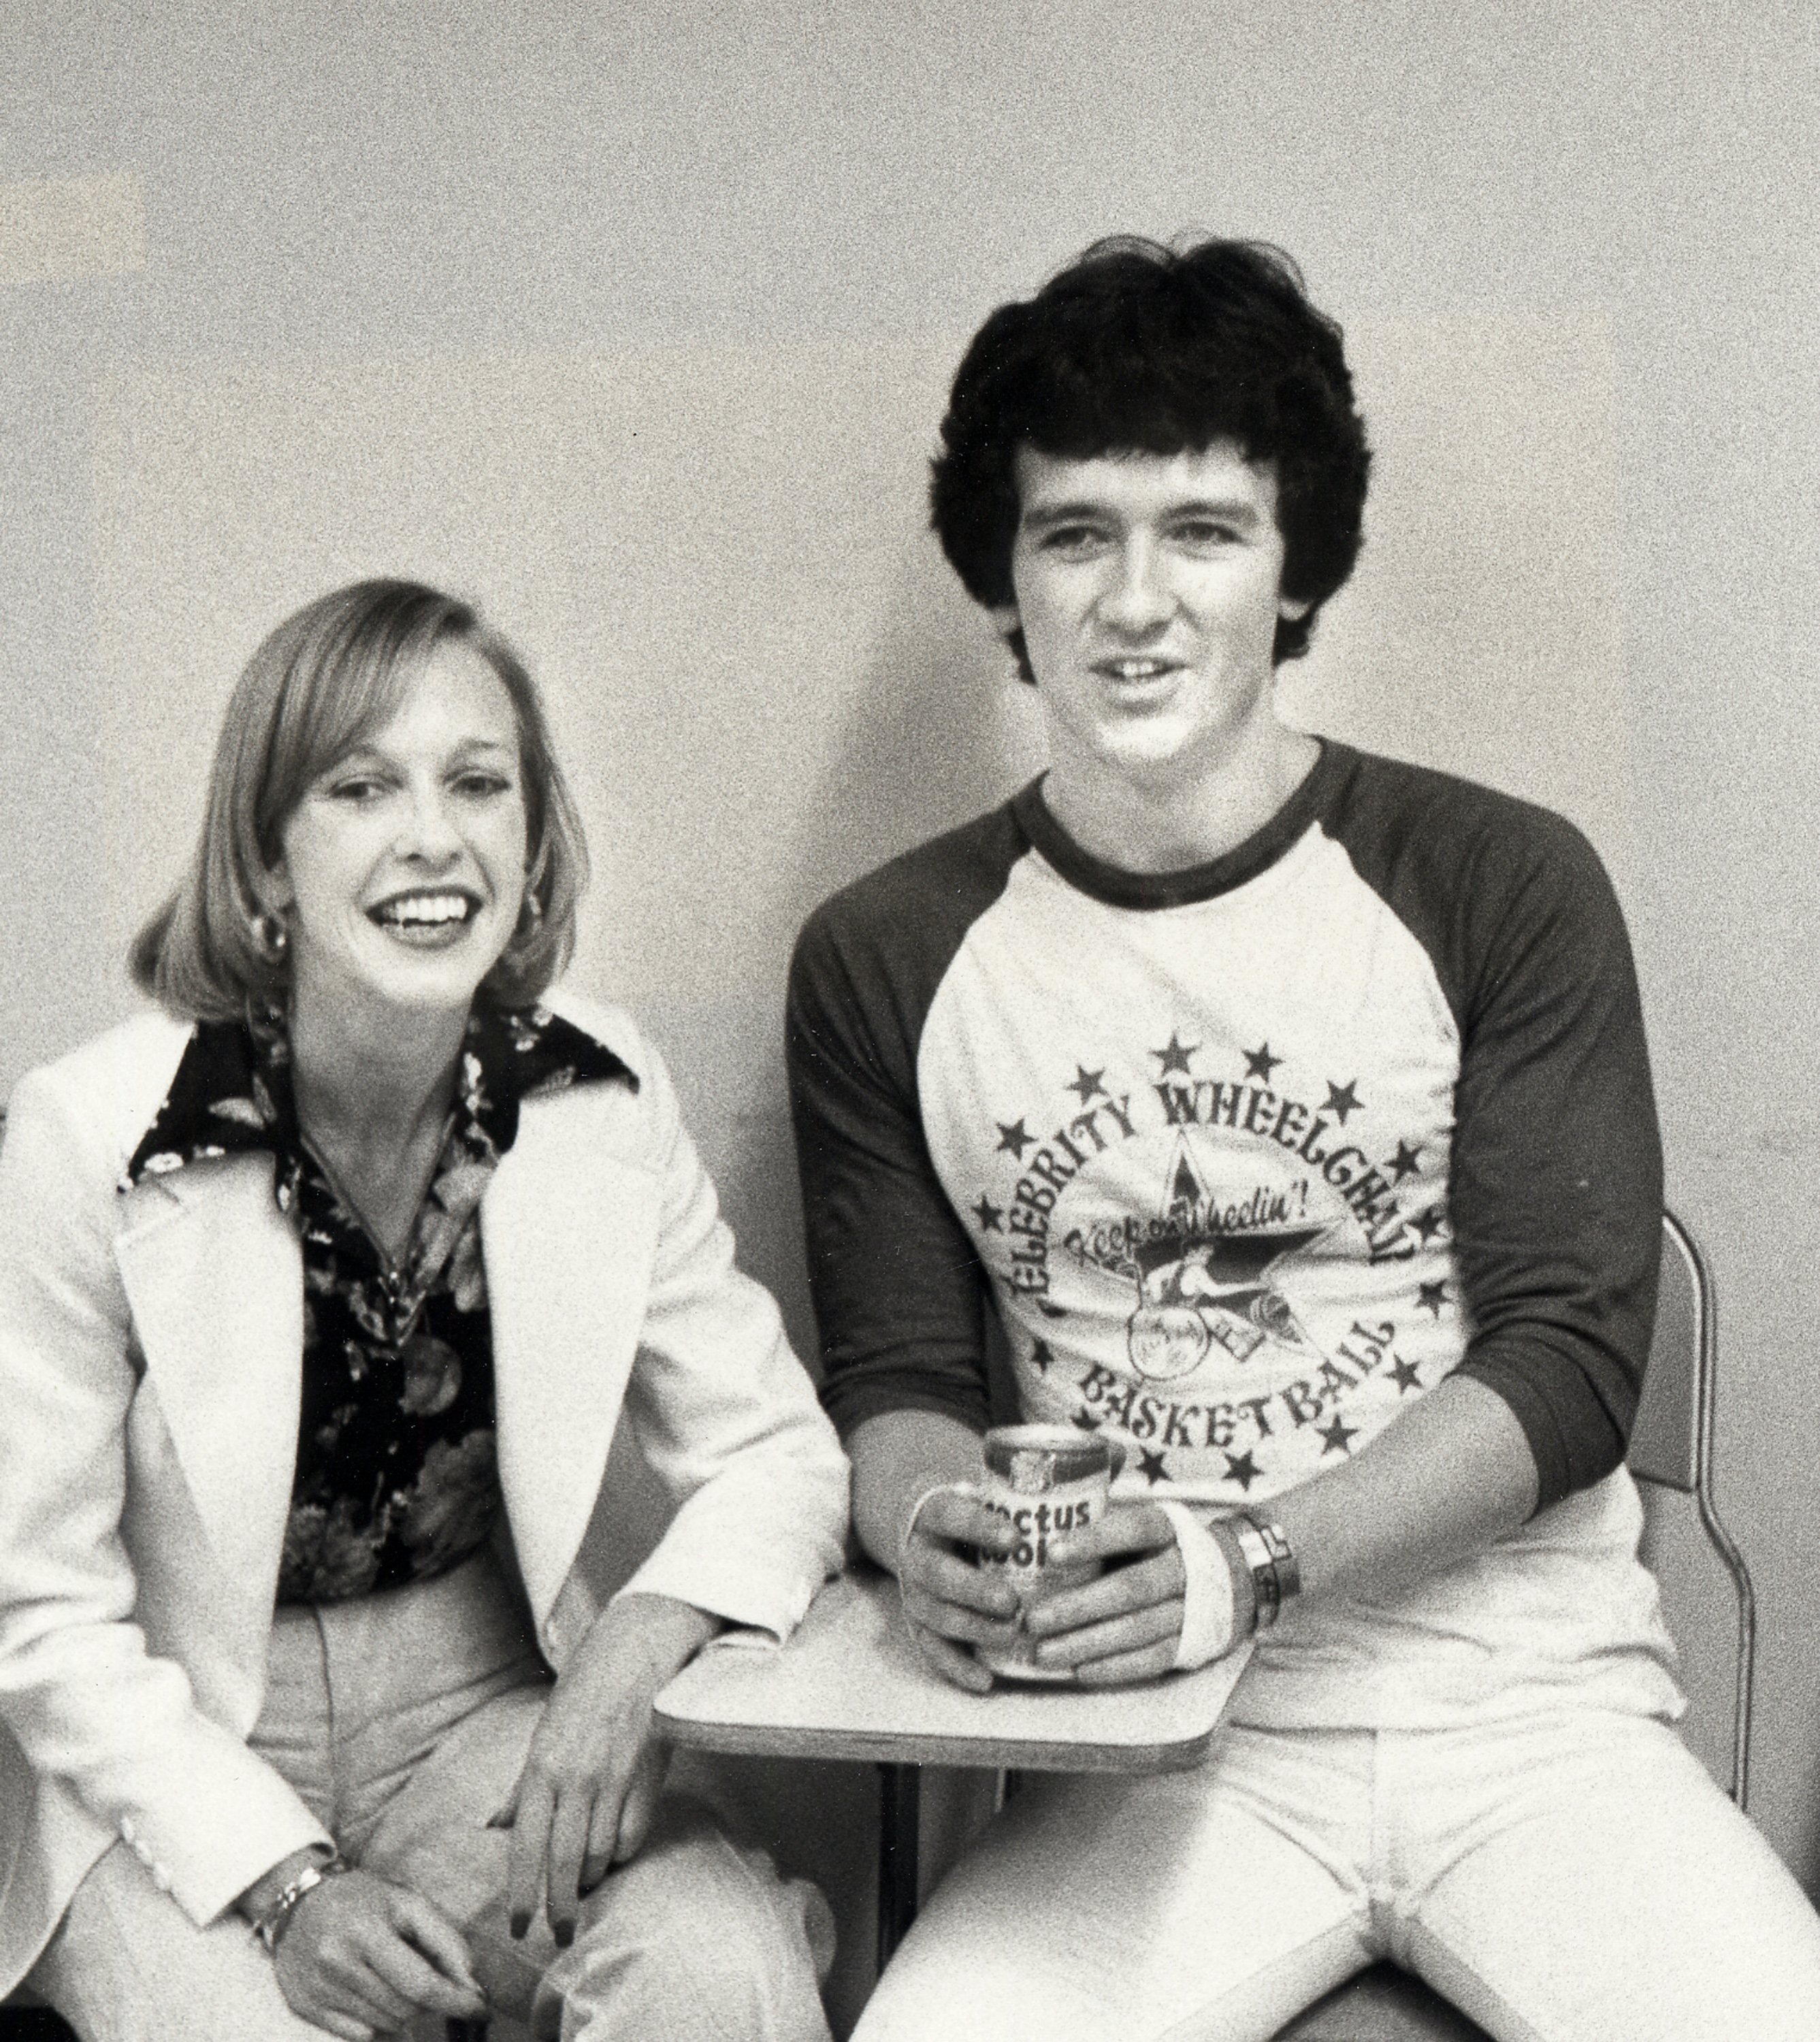 Patrick Duffy and his wife Carlyn Rosser attend a basketball game at California State University on May 22, 1977 in Northridge |  Photo: Getty Images